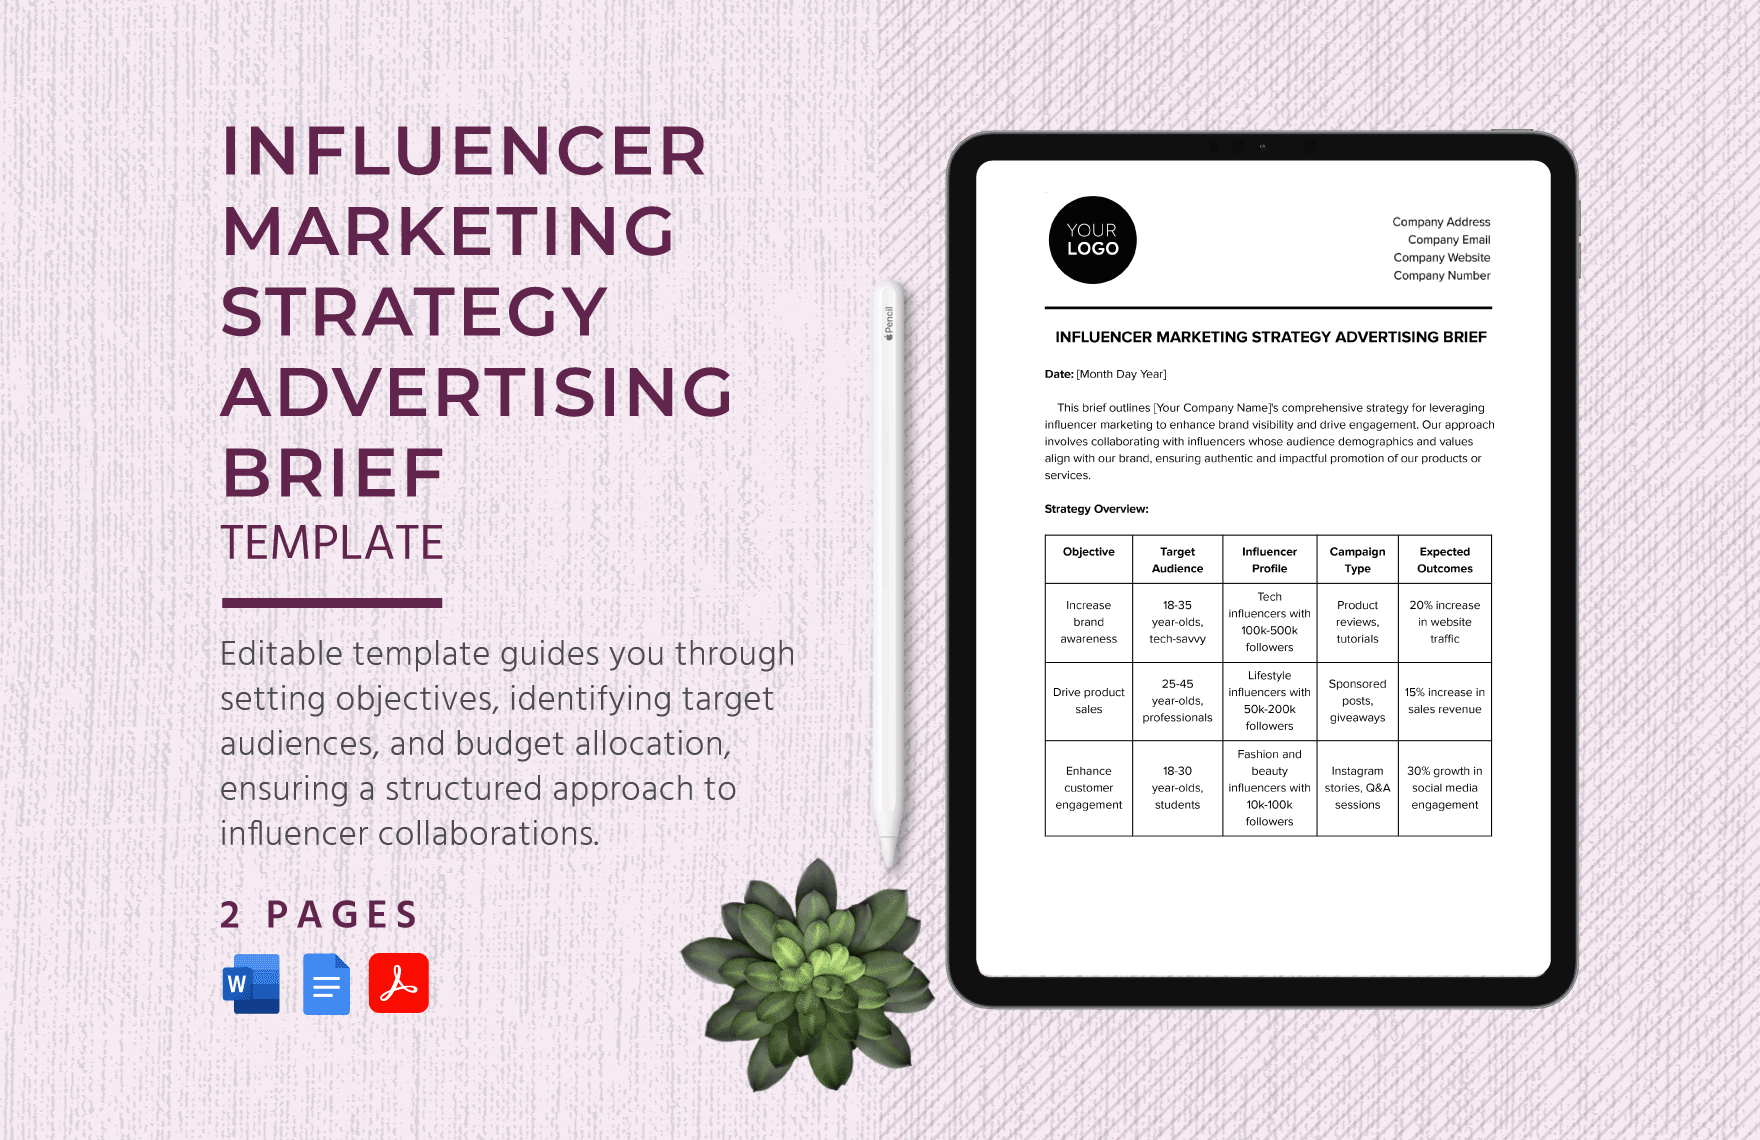 Influencer Marketing Strategy Advertising Brief Template